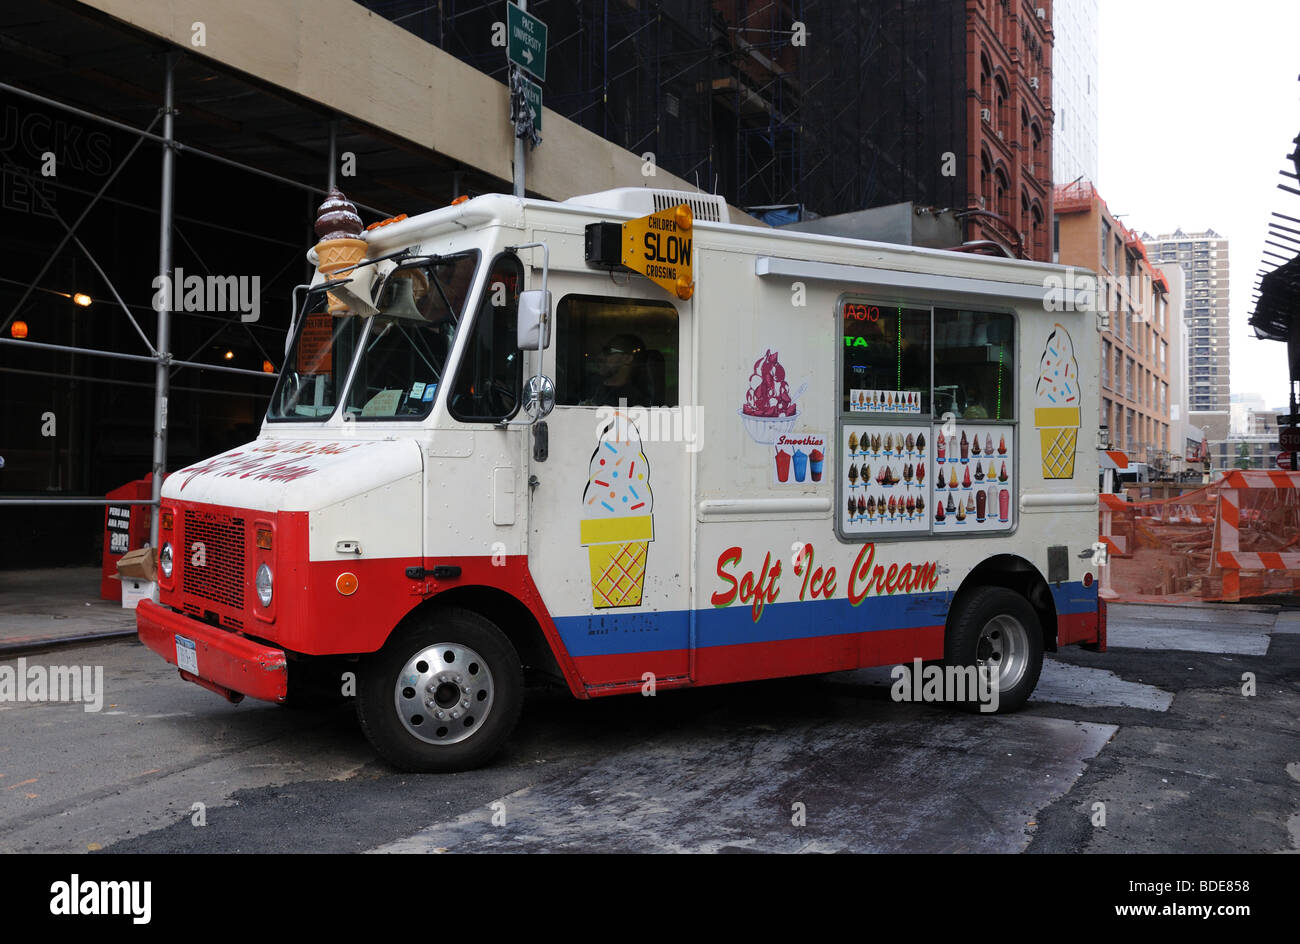 Summer brings ice cream trucks to New York City. This one is parked on a street under construction in Lower Manhattan. Stock Photo